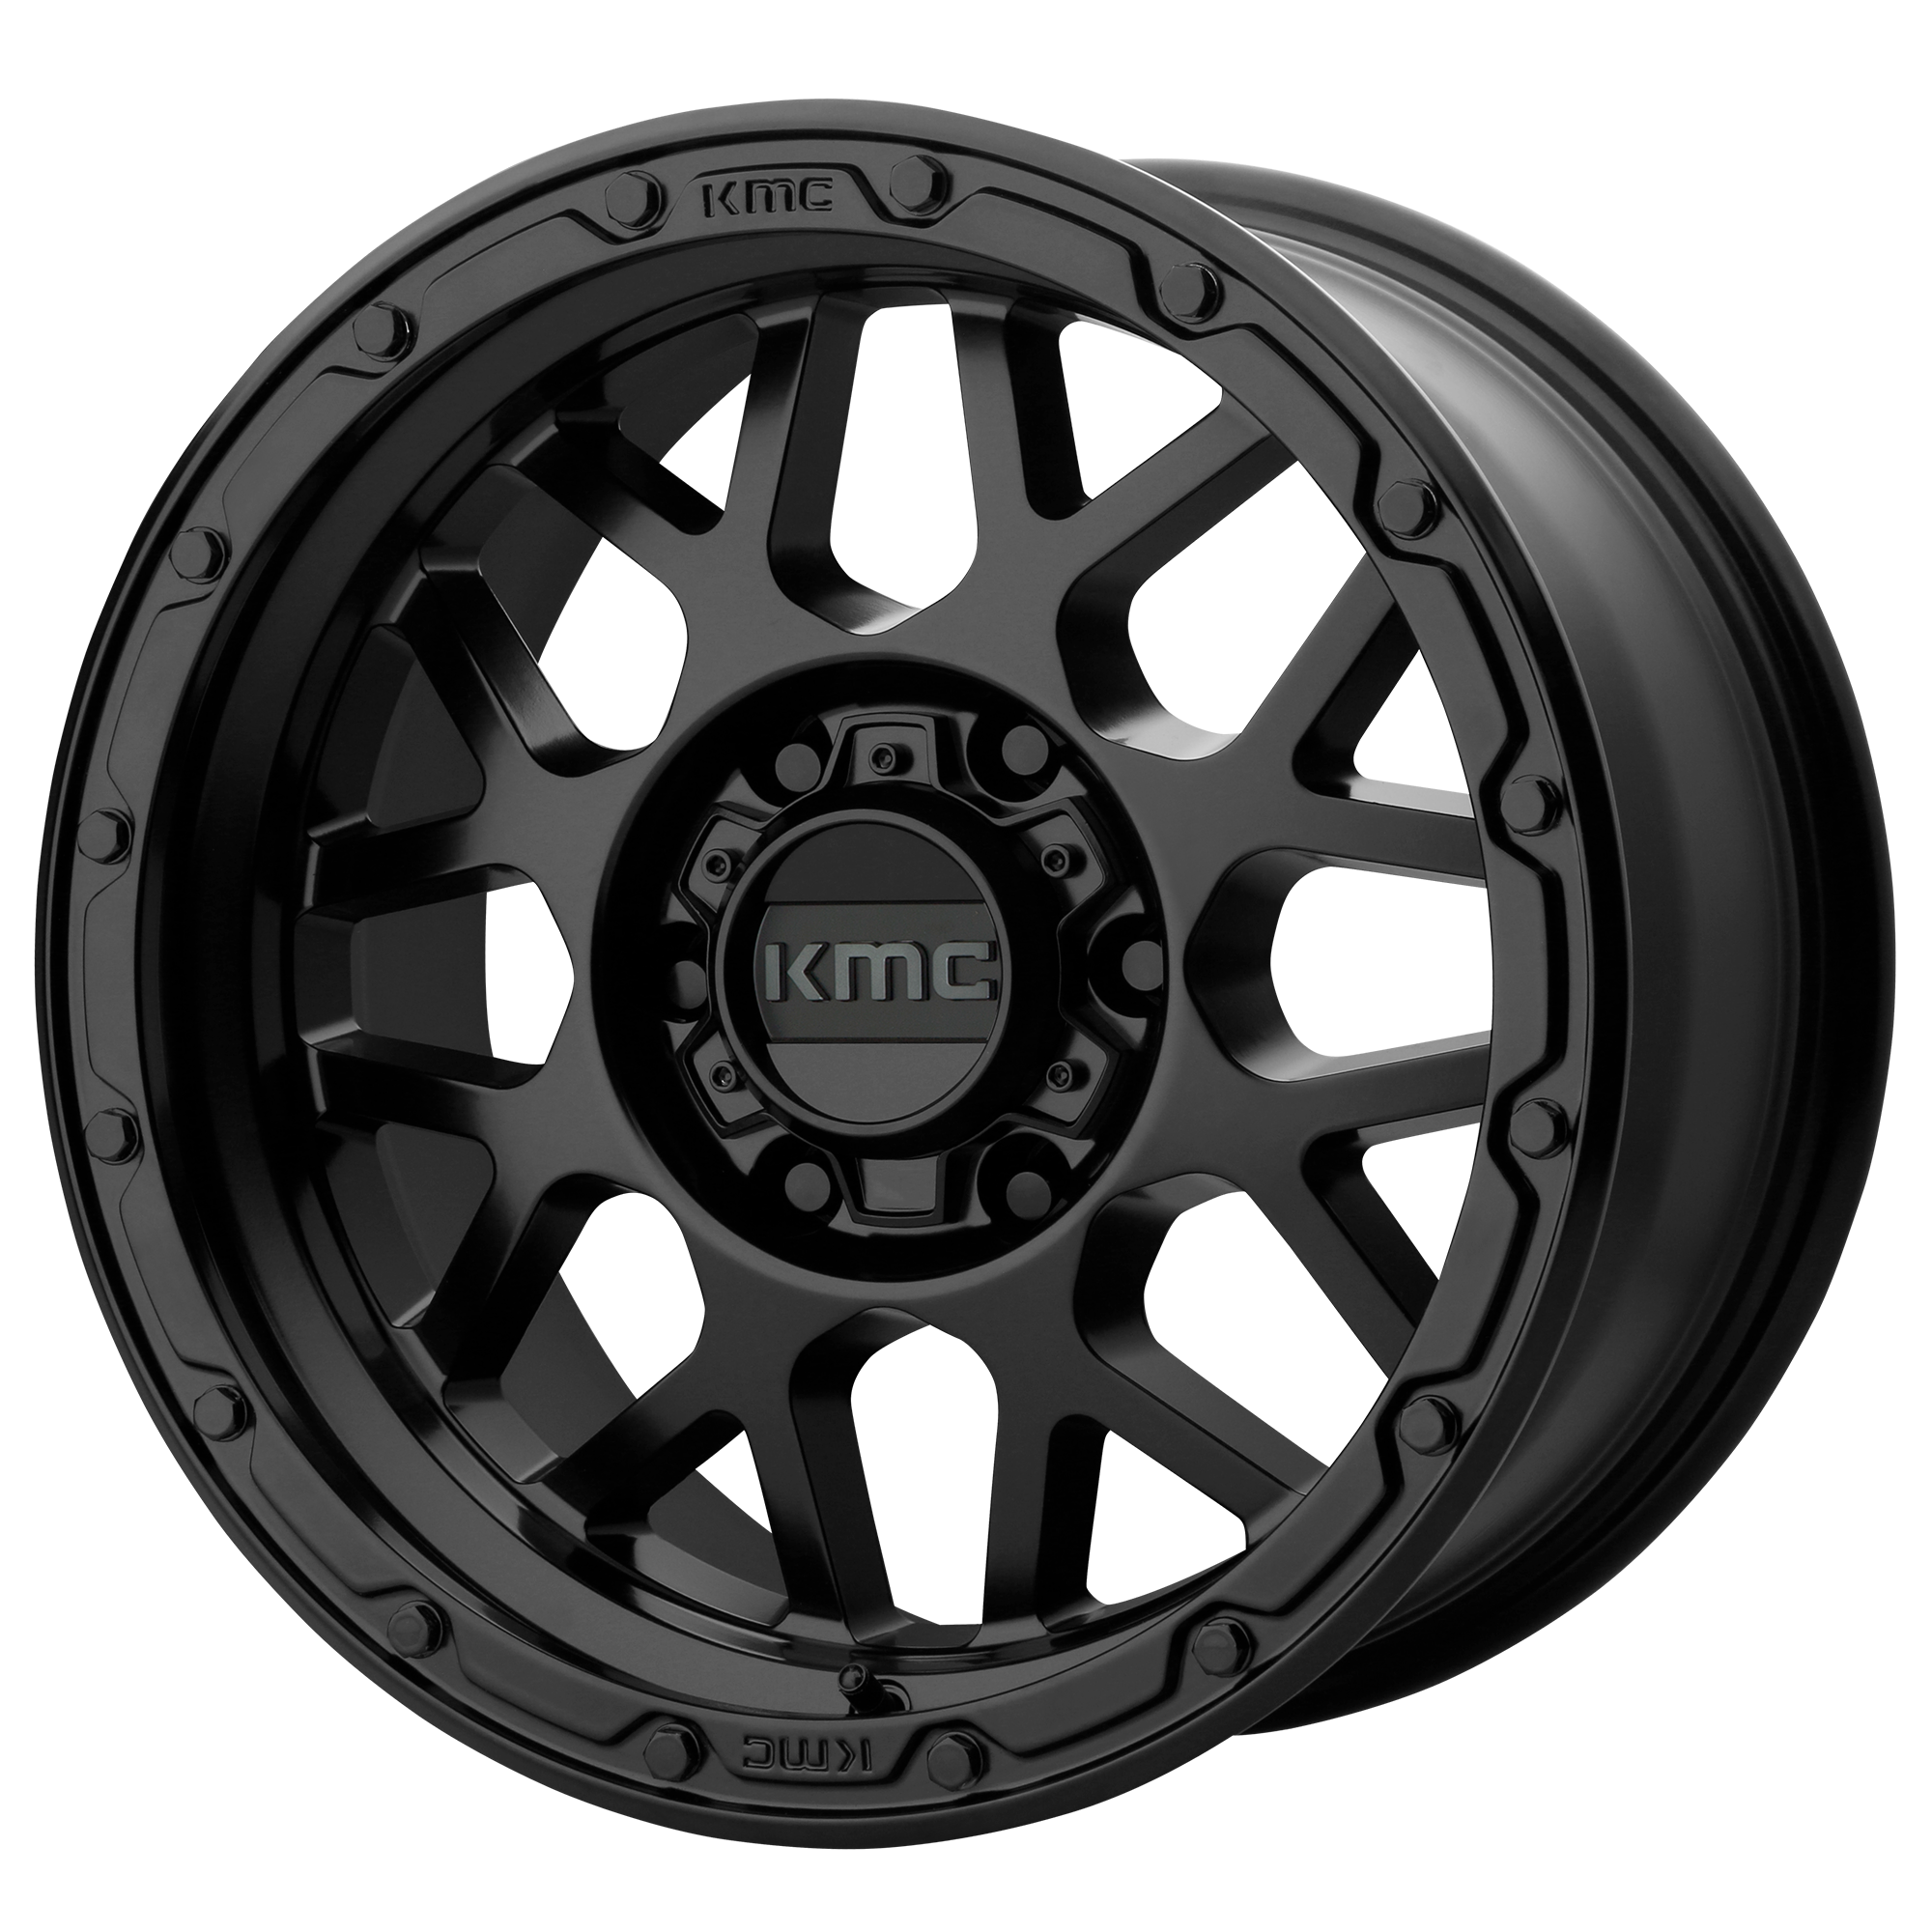 GRENADE OFF-ROAD 17x9 6x114.30 MATTE BLACK (18 mm) - Tires and Engine Performance